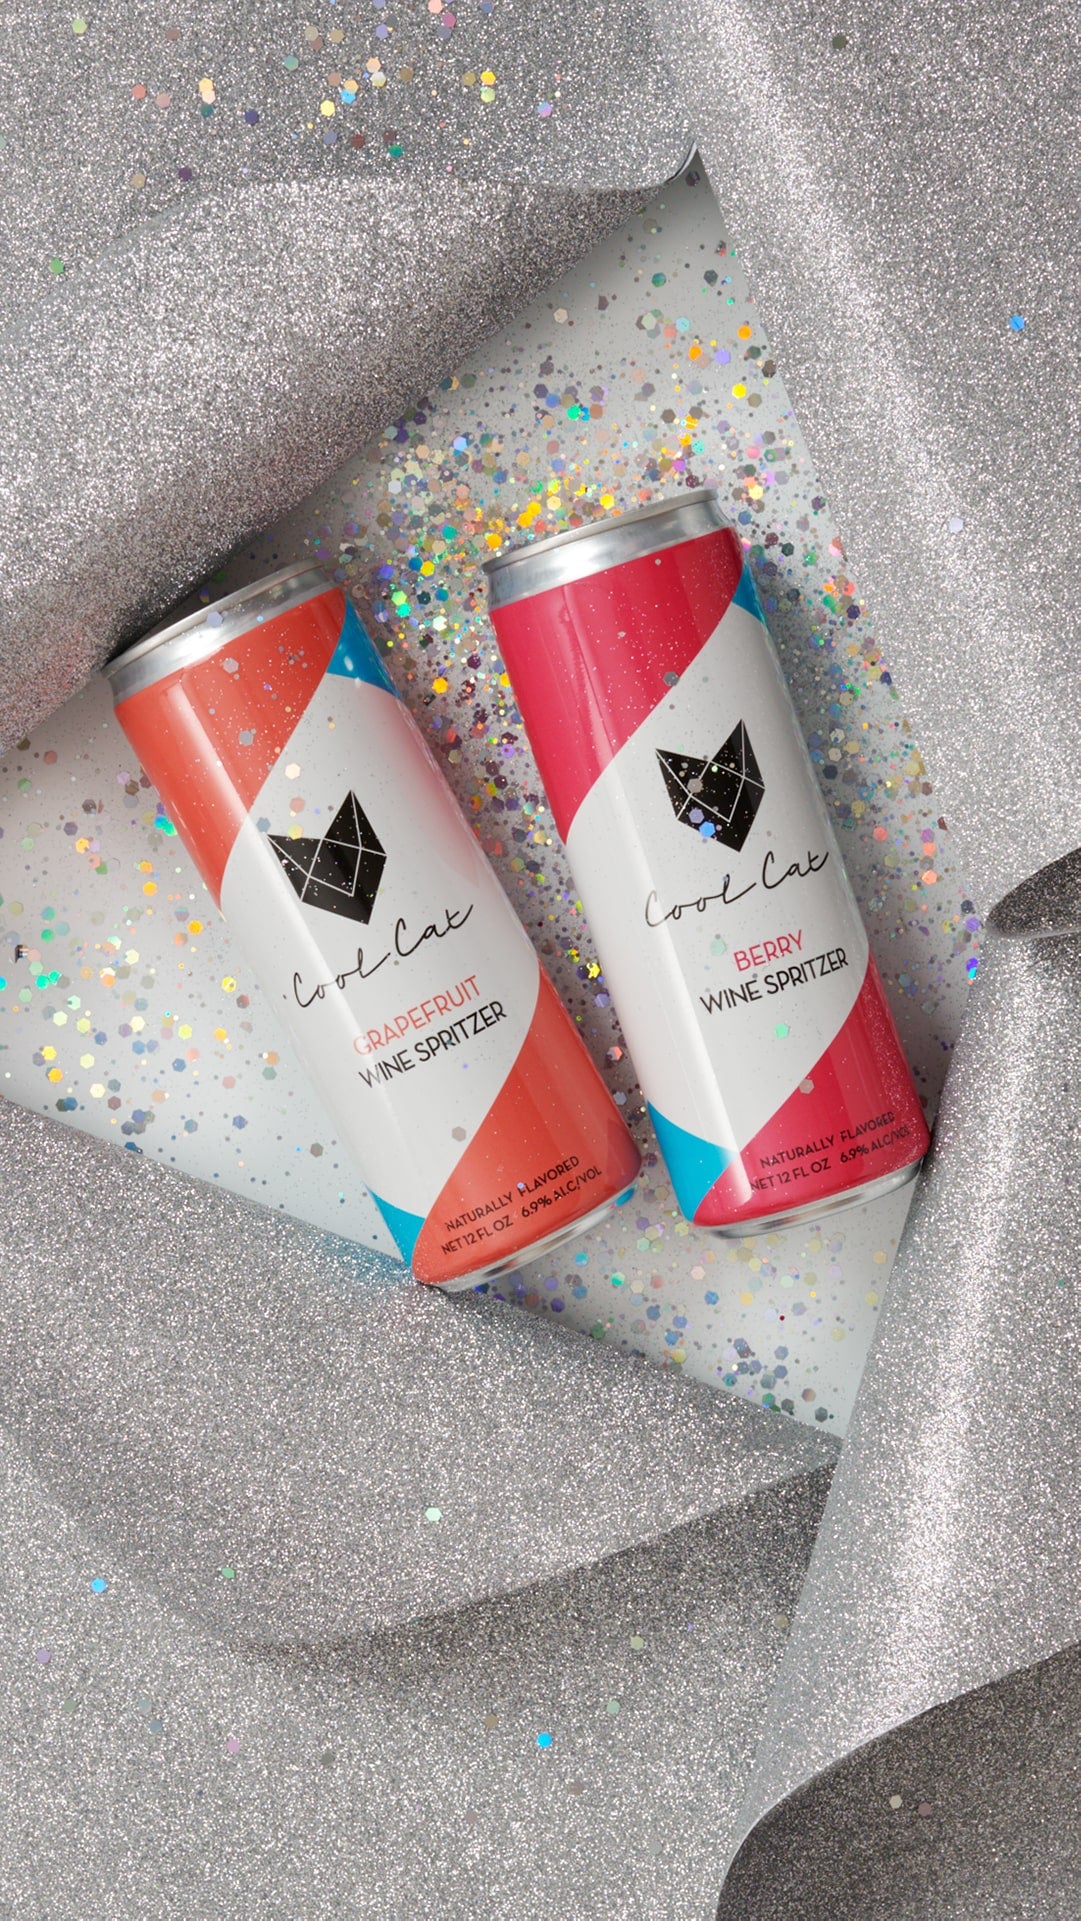 Two cans of Cool Cat cocktail in wrapping paper.